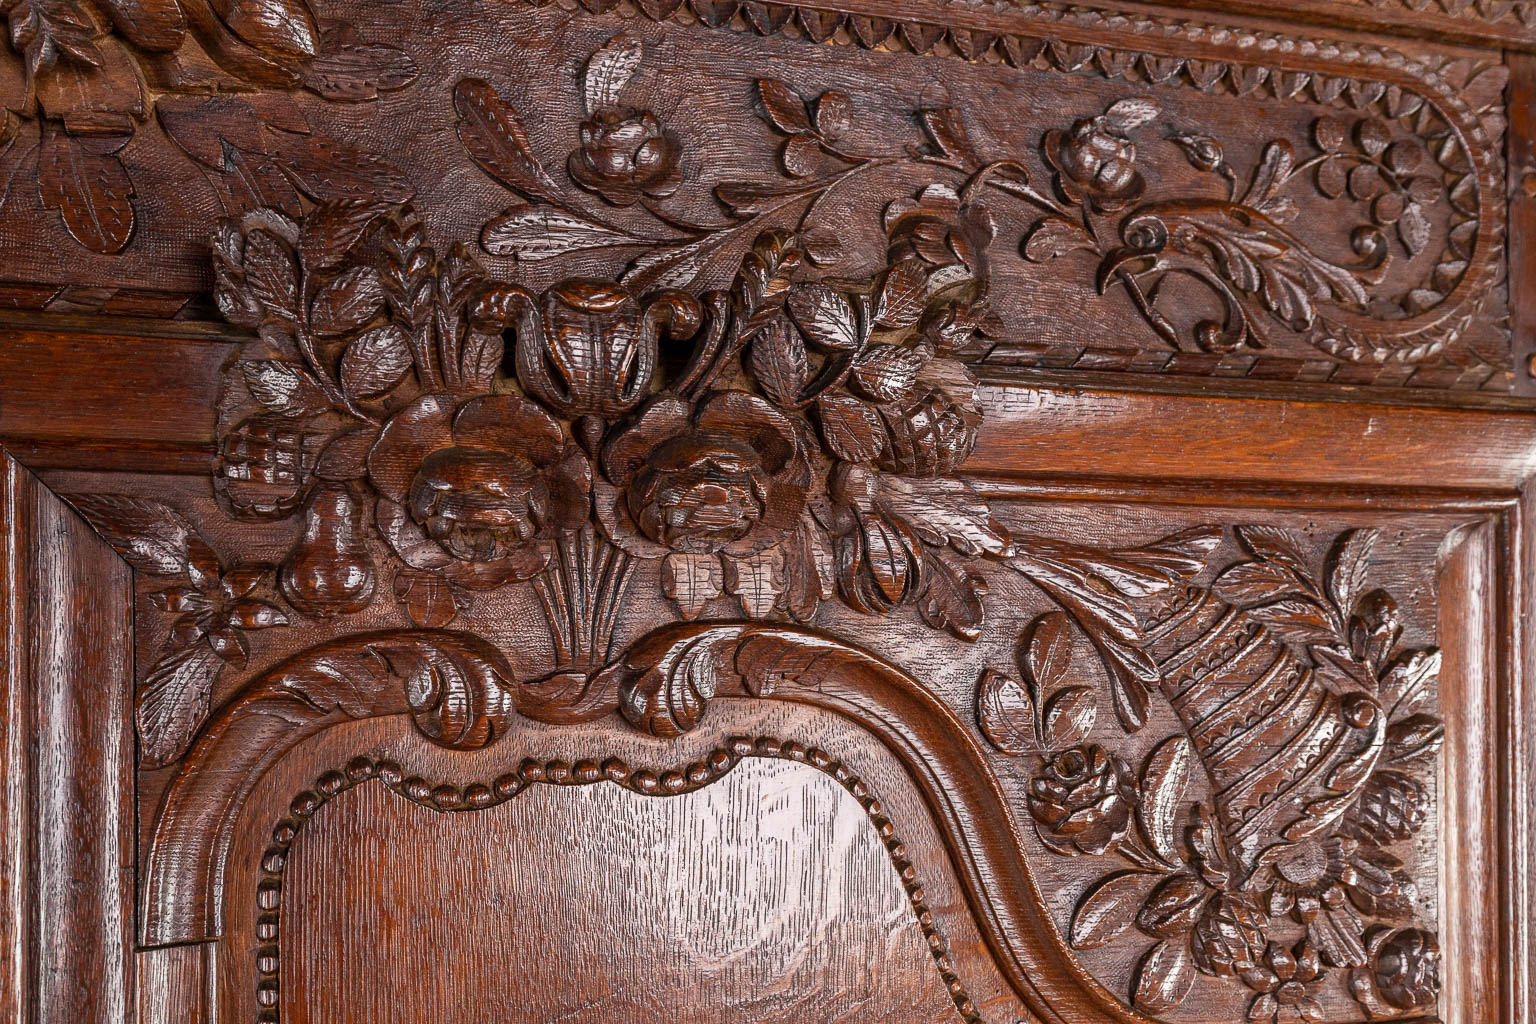 A richly sculptured and antique Normandy high cabinet, Armoire. France, 18th C.